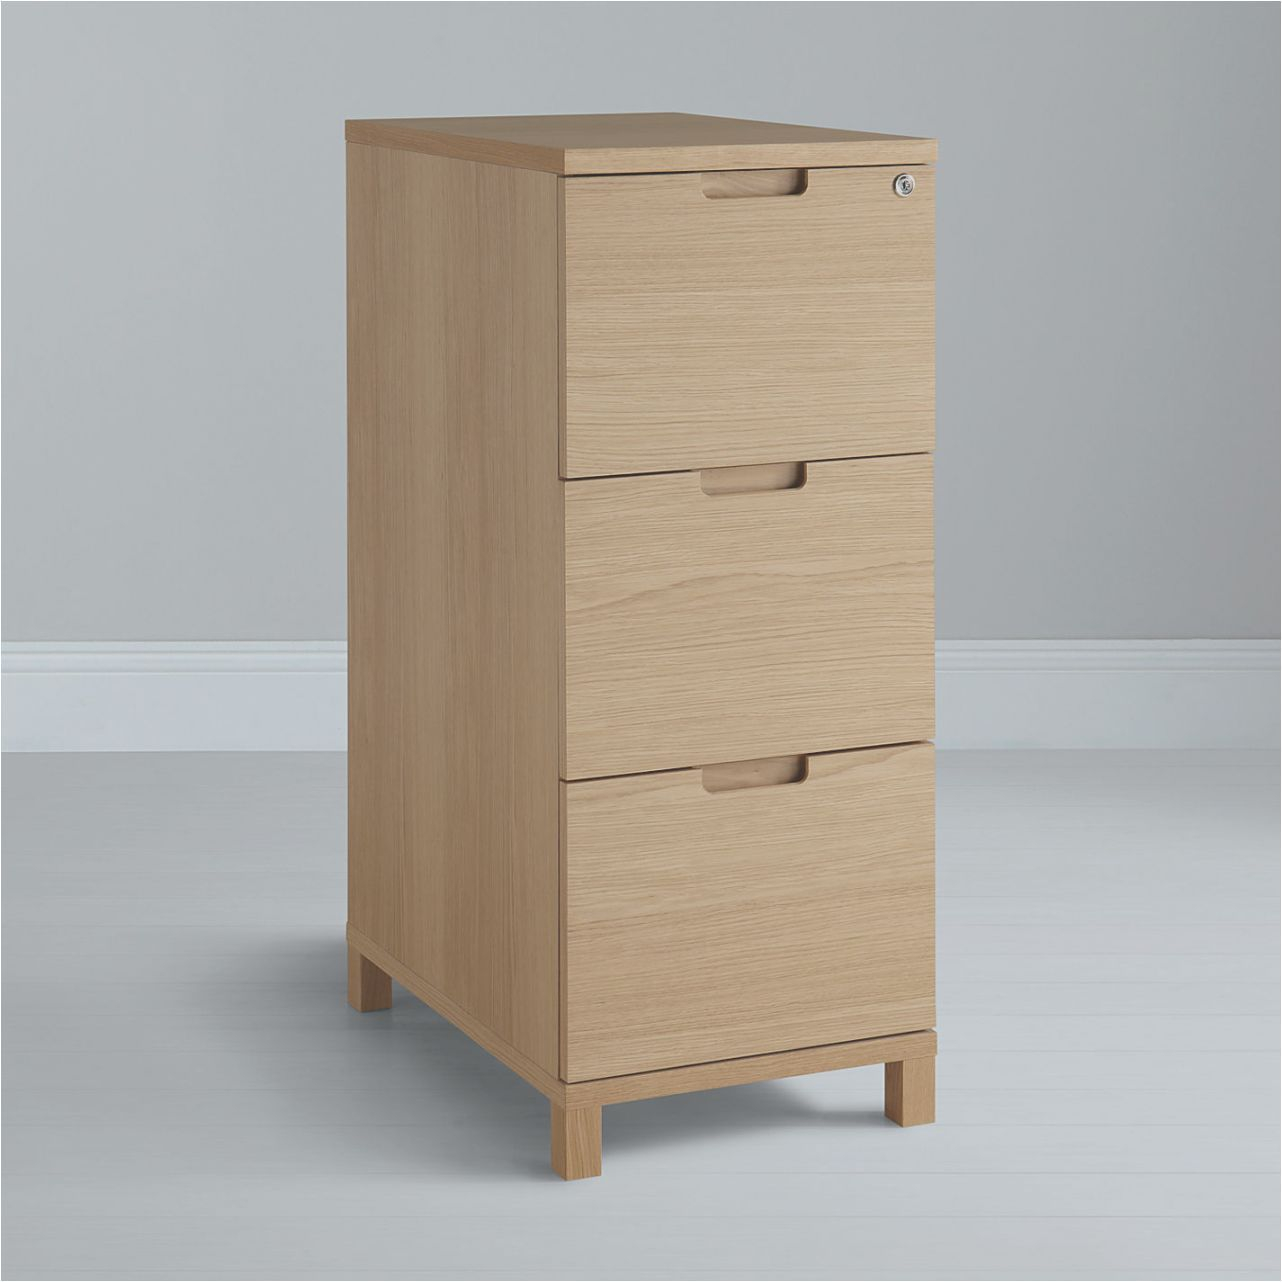 50 Unique Two Drawer Wood Filing Cabinets Atmosphere Two Drawer for proportions 1282 X 1282